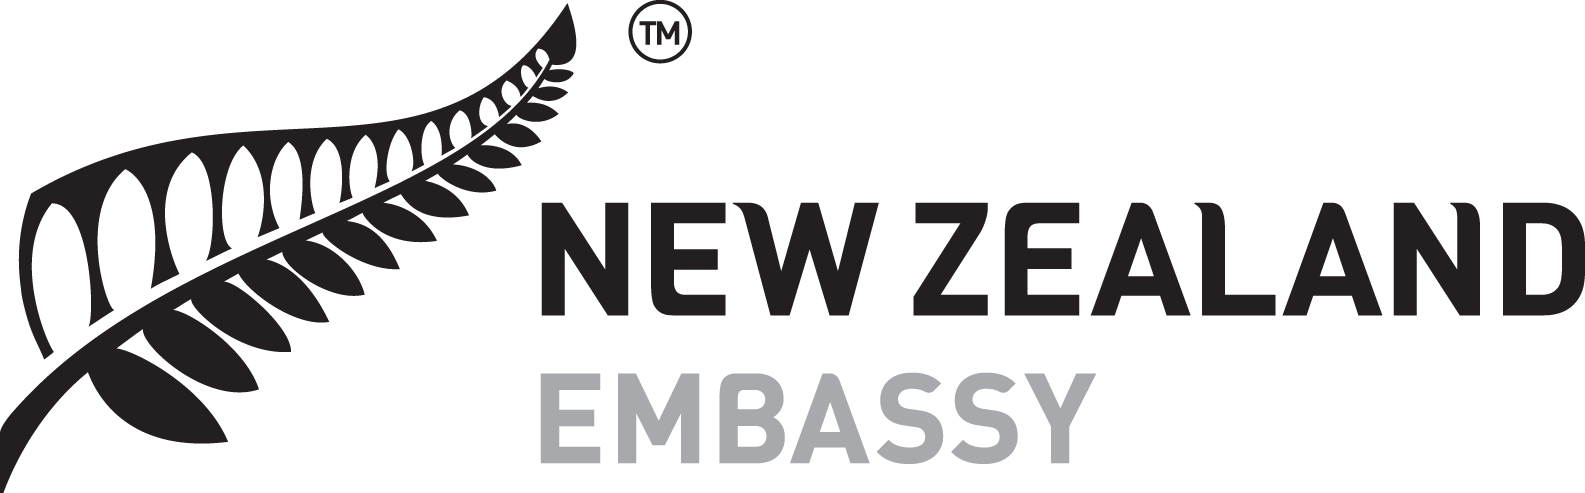 NZ Logo - Logos | New Zealand Ministry of Foreign Affairs and Trade